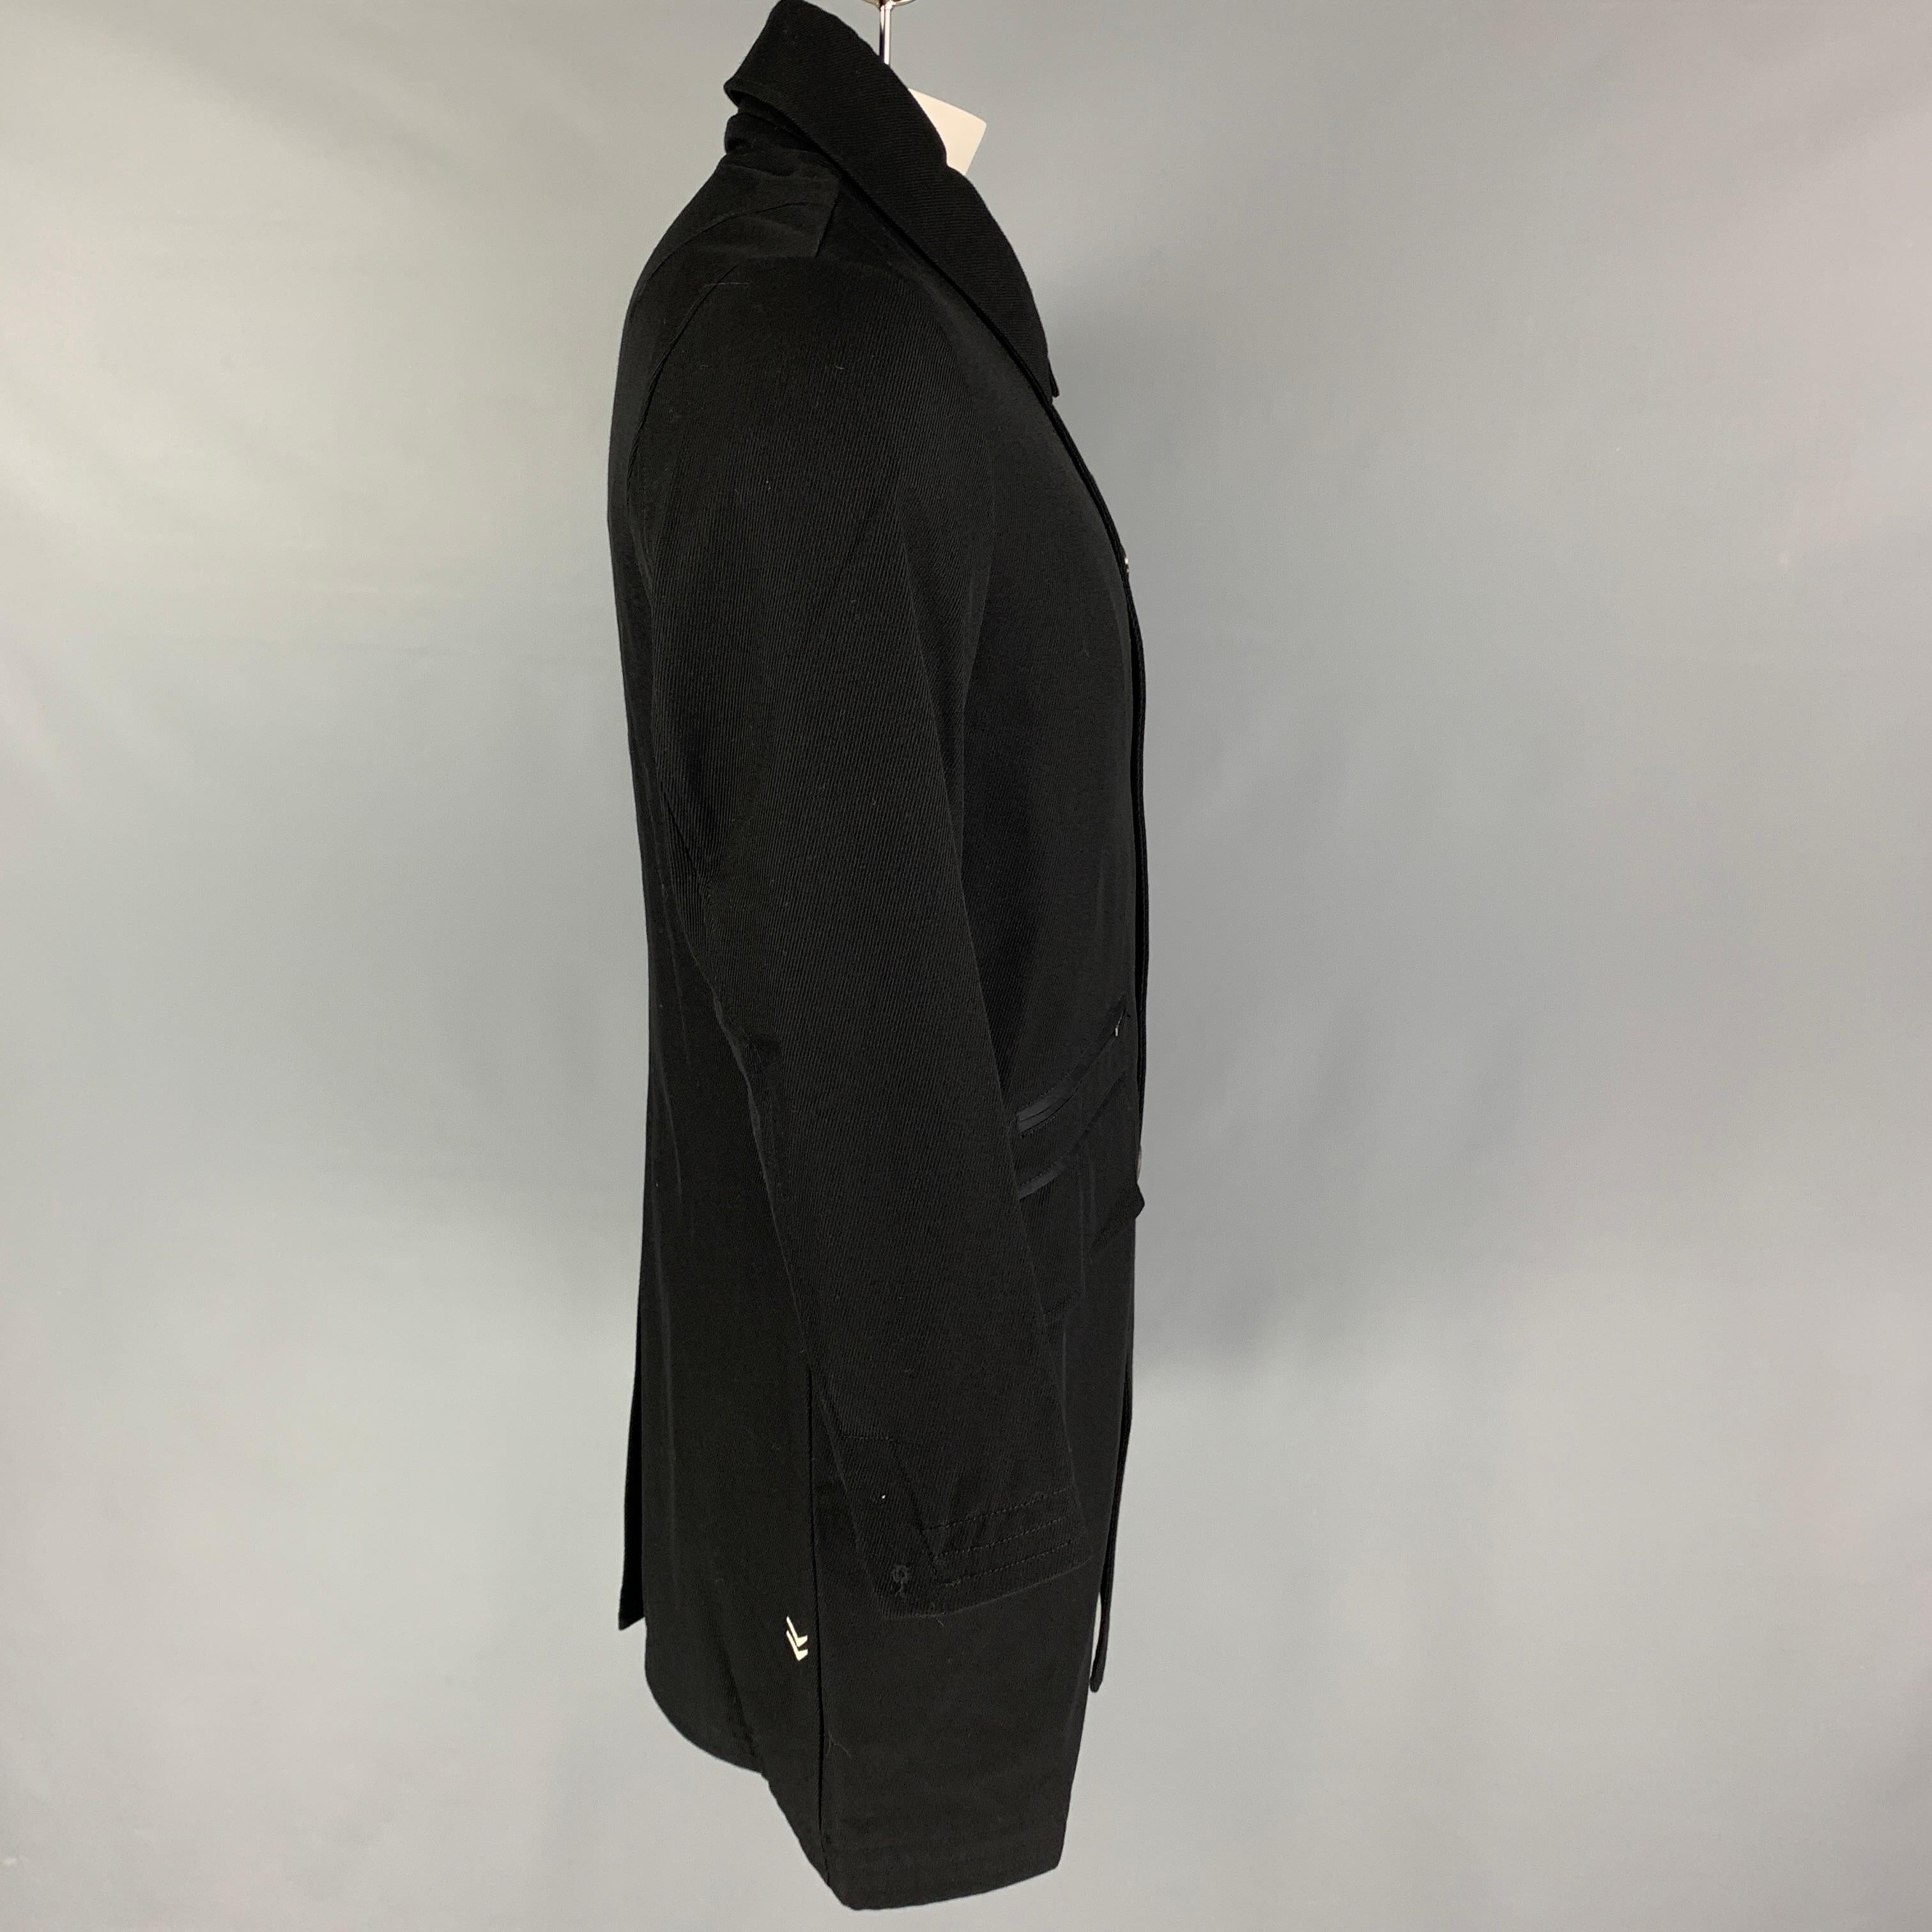 JOHN VARVATOS x CONVERSE coat comes in a black lana wool slap pockets, single back vent, ribbed collar, spread collar, and a buttoned closure. 

Excellent Pre-Owned Condition.
Marked: Size tag removed.

Measurements:

Shoulder: 17.5 in.
Chest: 42